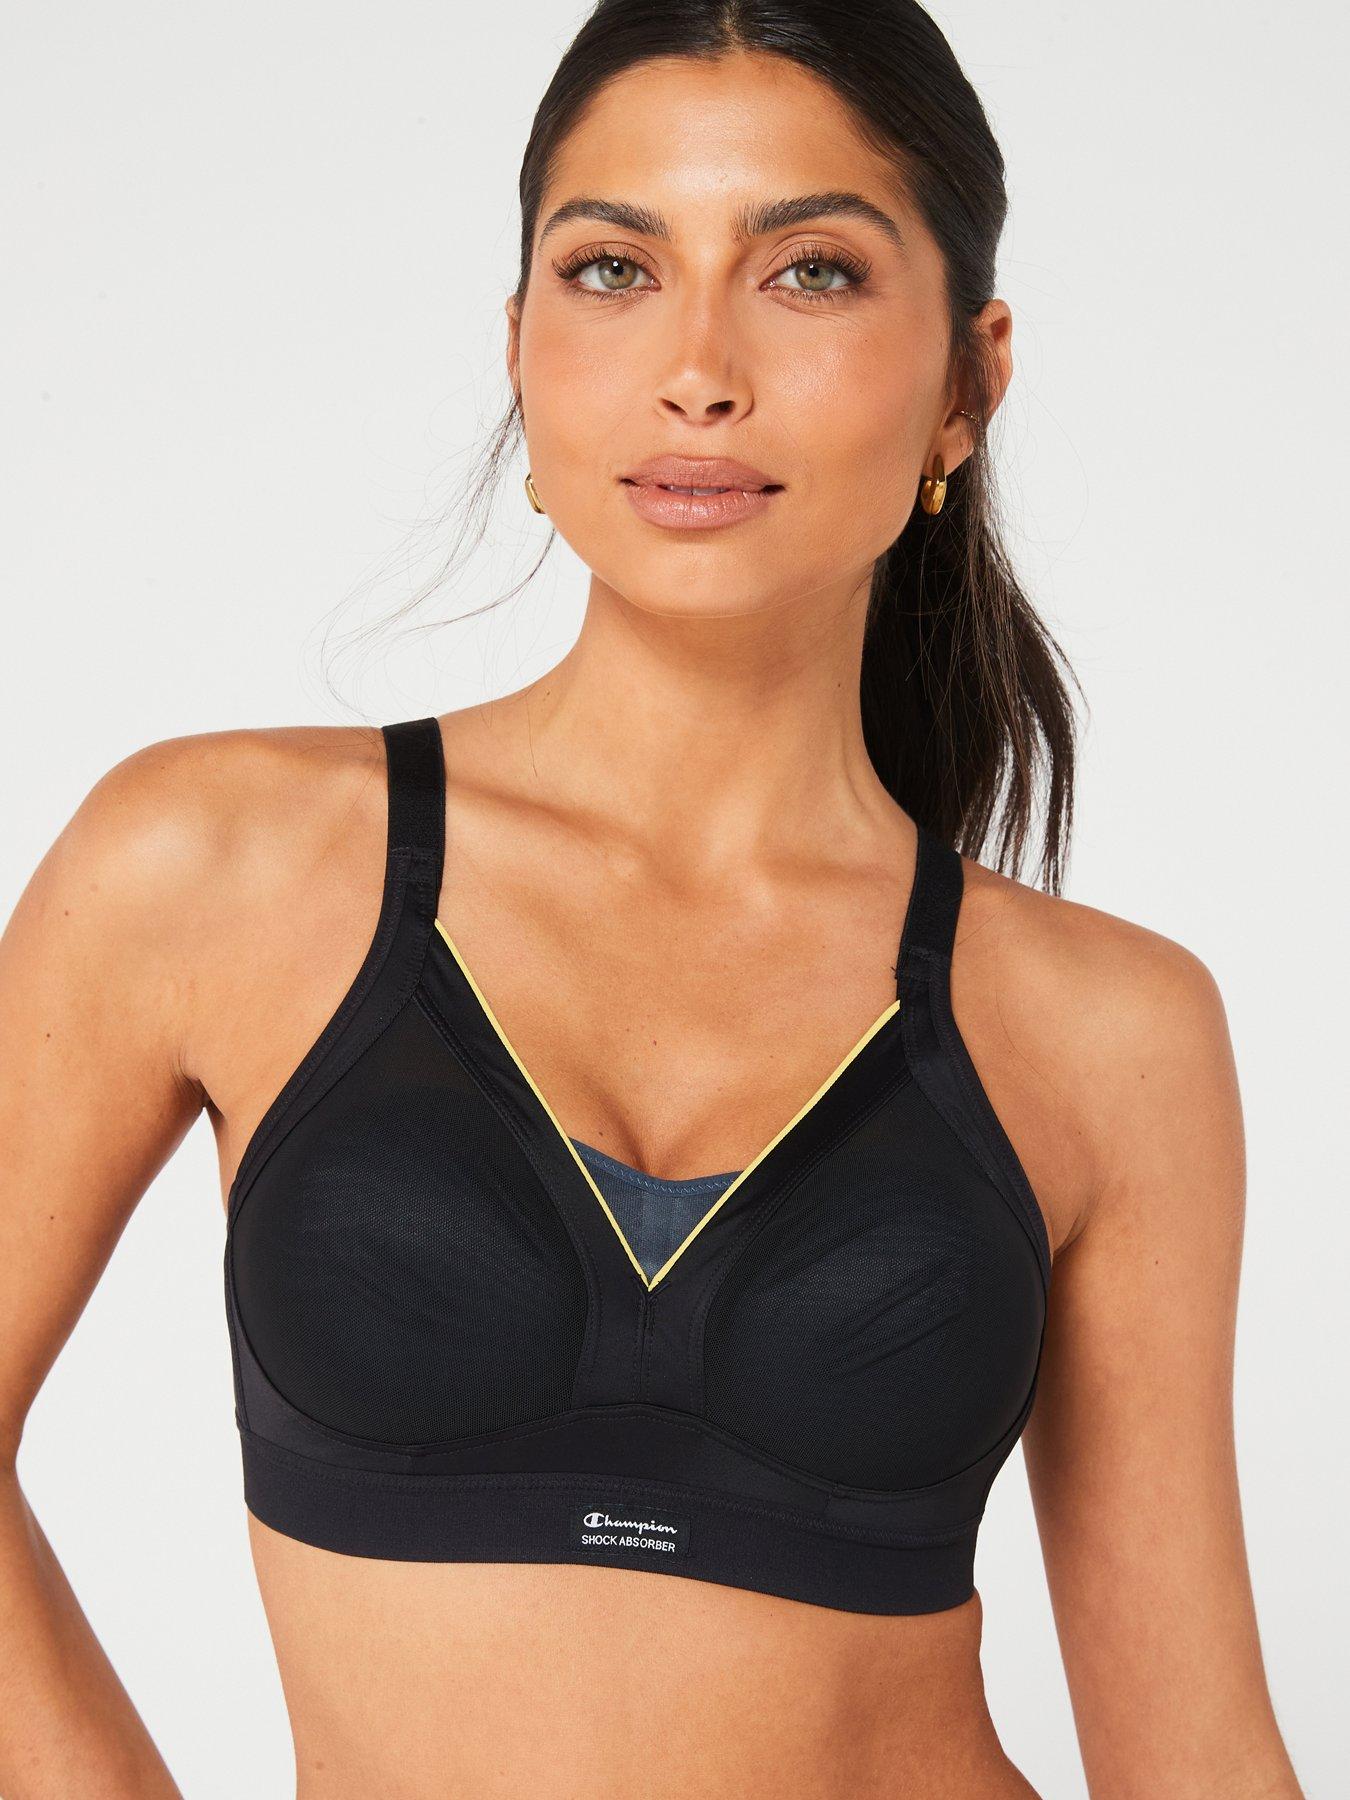 Shock Absorber X Champion padded high support running bra in navy and red